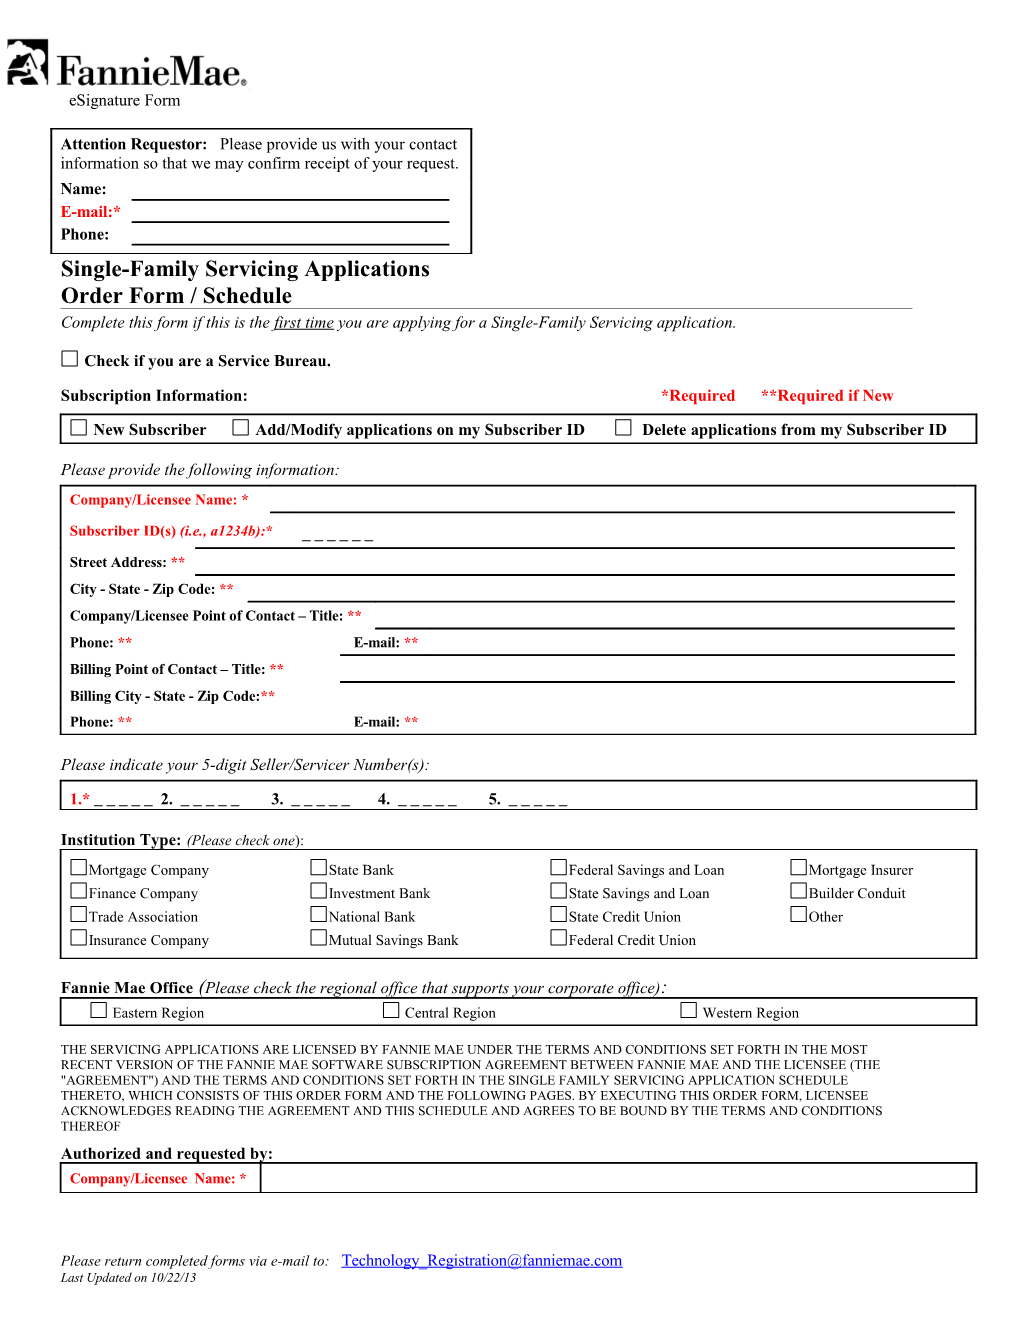 Single Family Servicing Applications Order Form/Schedule